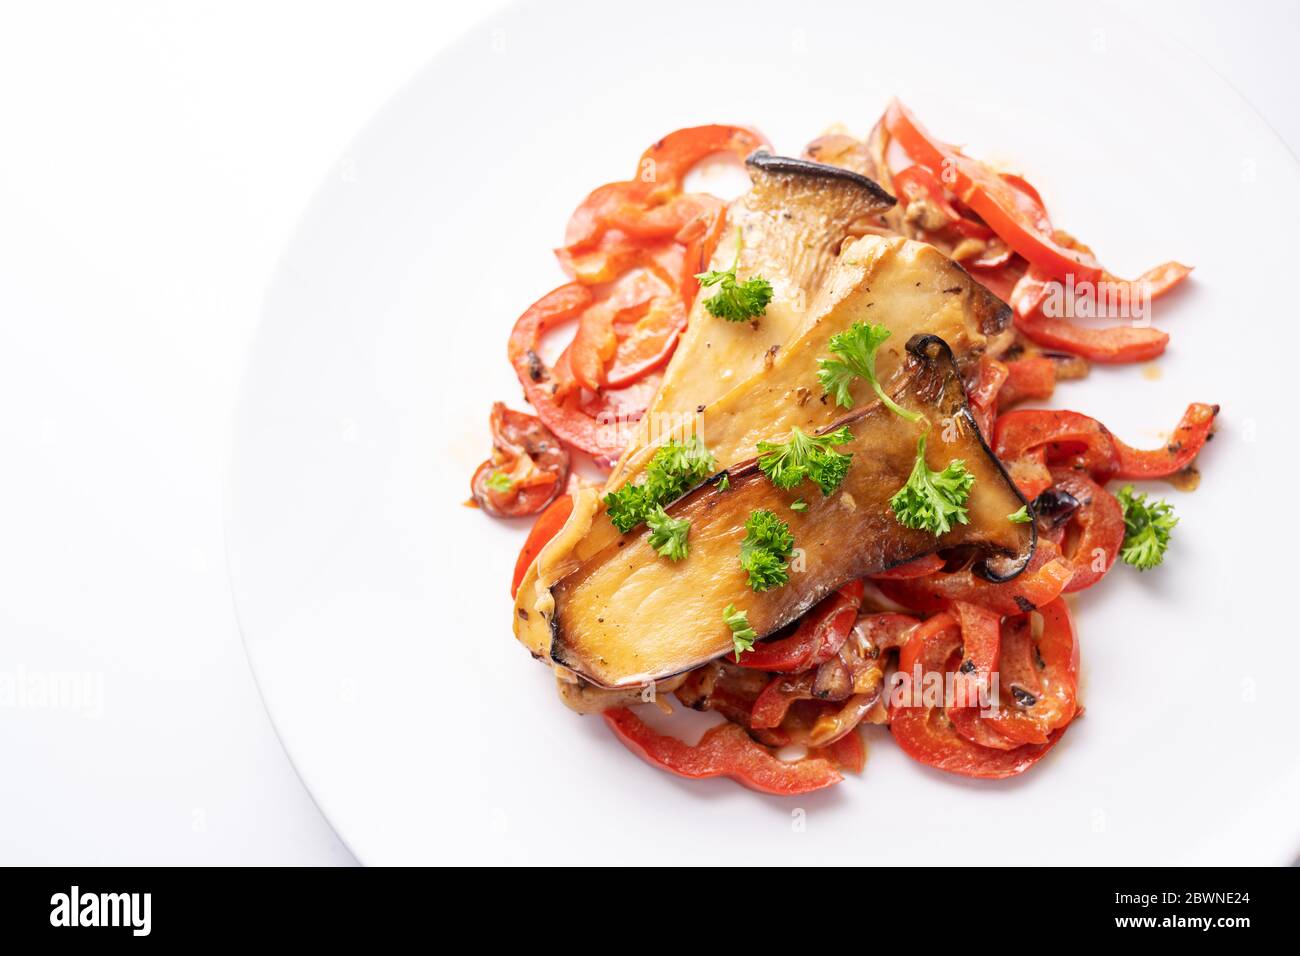 King oyster mushrooms on red bell pepper with parsley garnish served on a white plate, healthy vegetable meal for low carb diet and vegetarians, copy Stock Photo